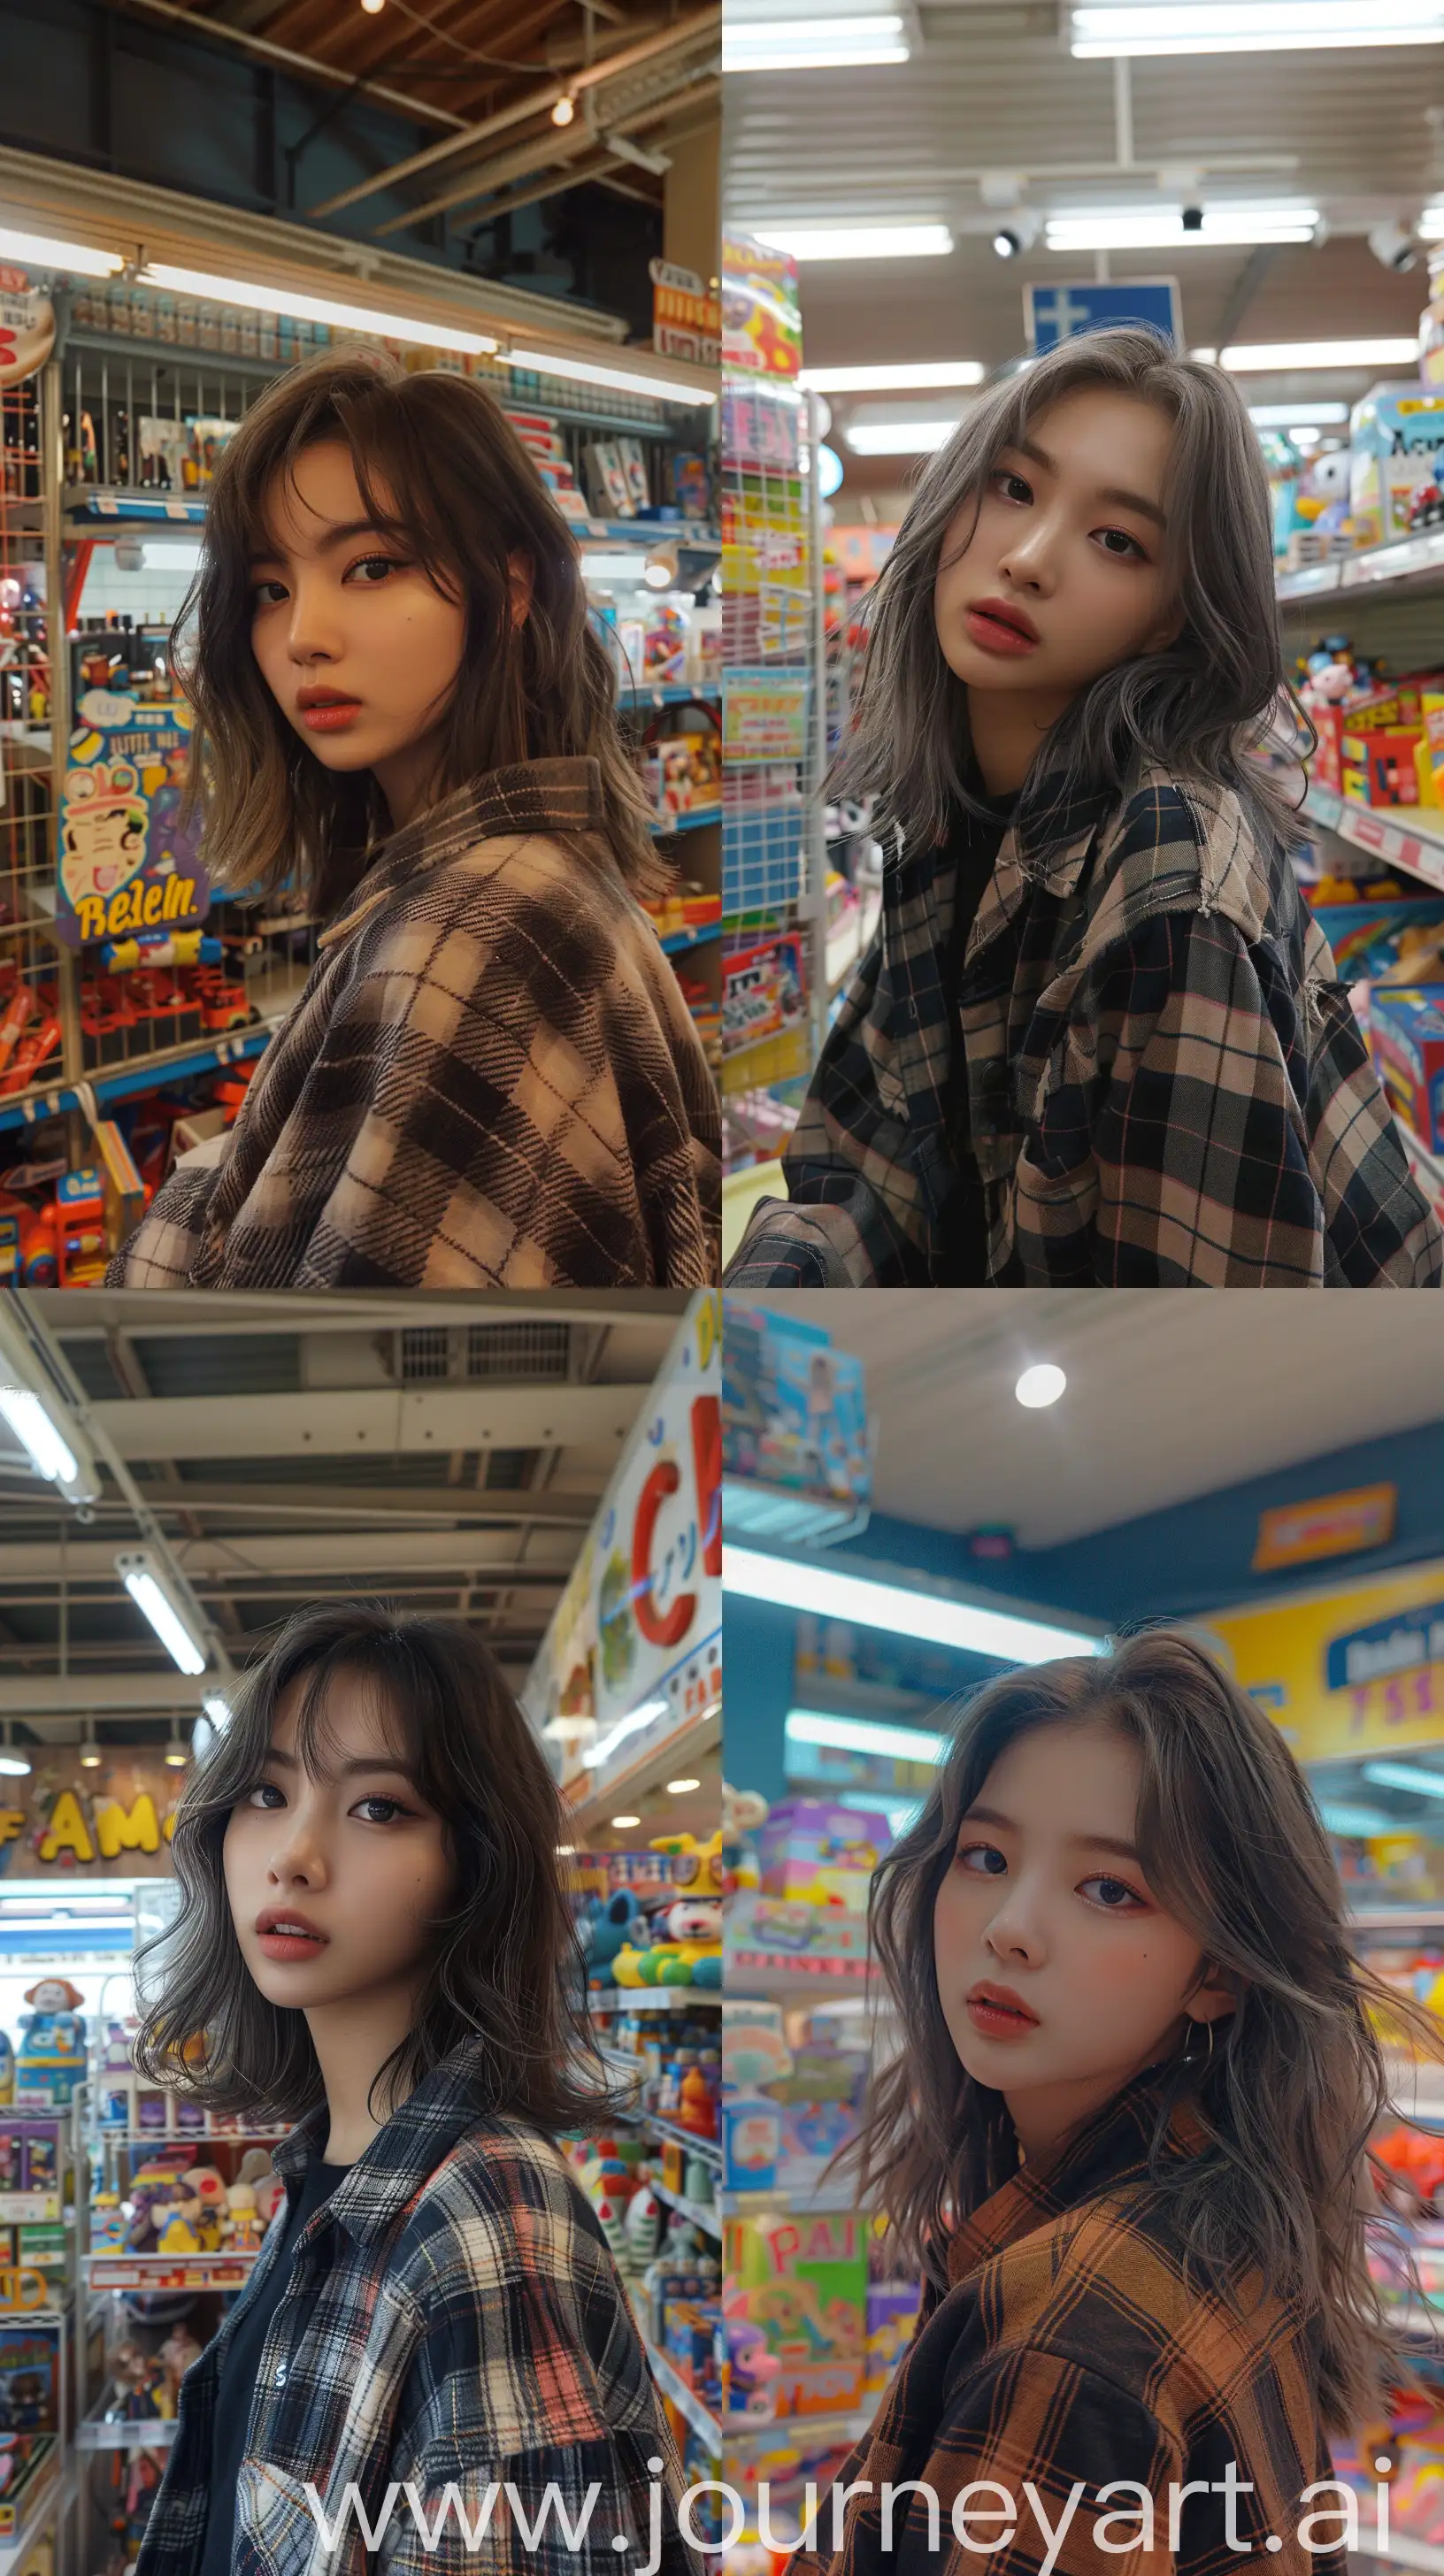 Jennie-from-BLACKPINK-with-Medium-Wolfcut-Hair-and-Grunge-Aesthetic-Makeup-Shopping-in-a-Toy-Store